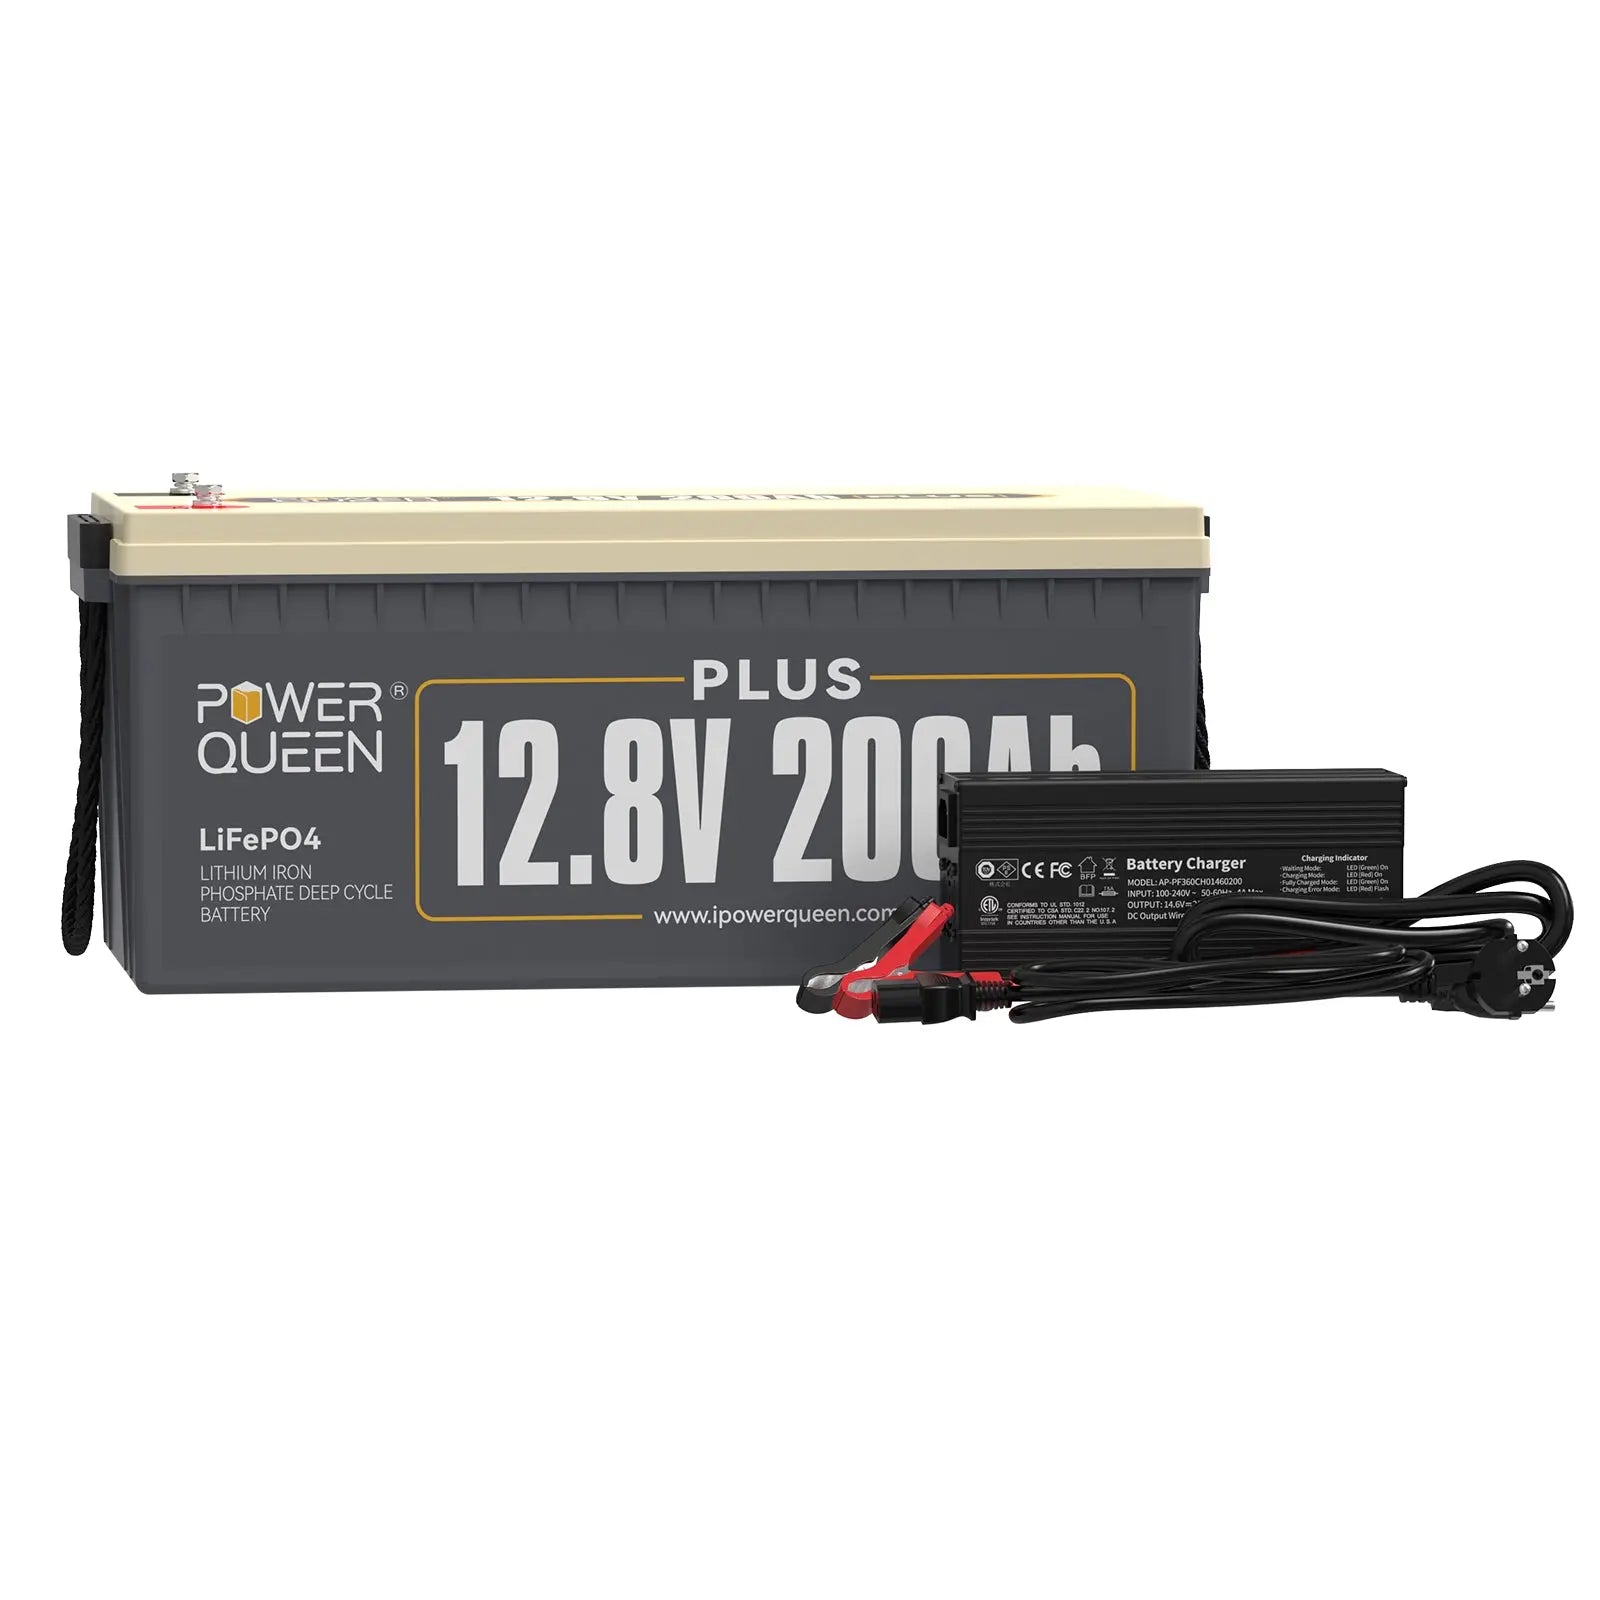 Power Queen 12V 20A Charger Kit With 12V 200Ah Plus Deep Cycle Lithium Battery Power Queen